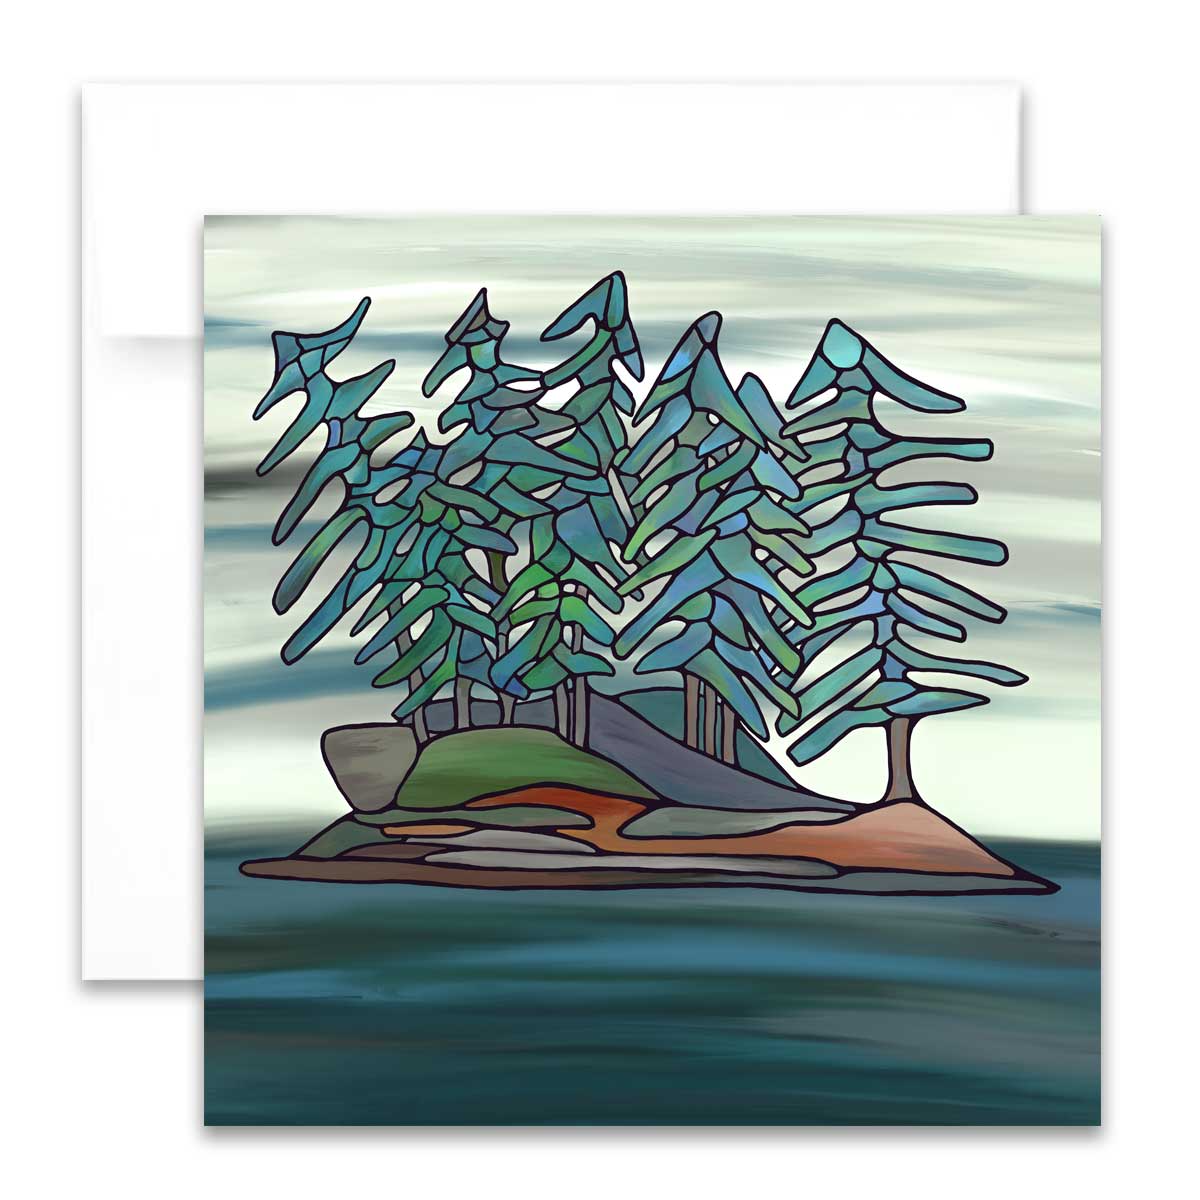 Colouring Greeting Card - Little Island